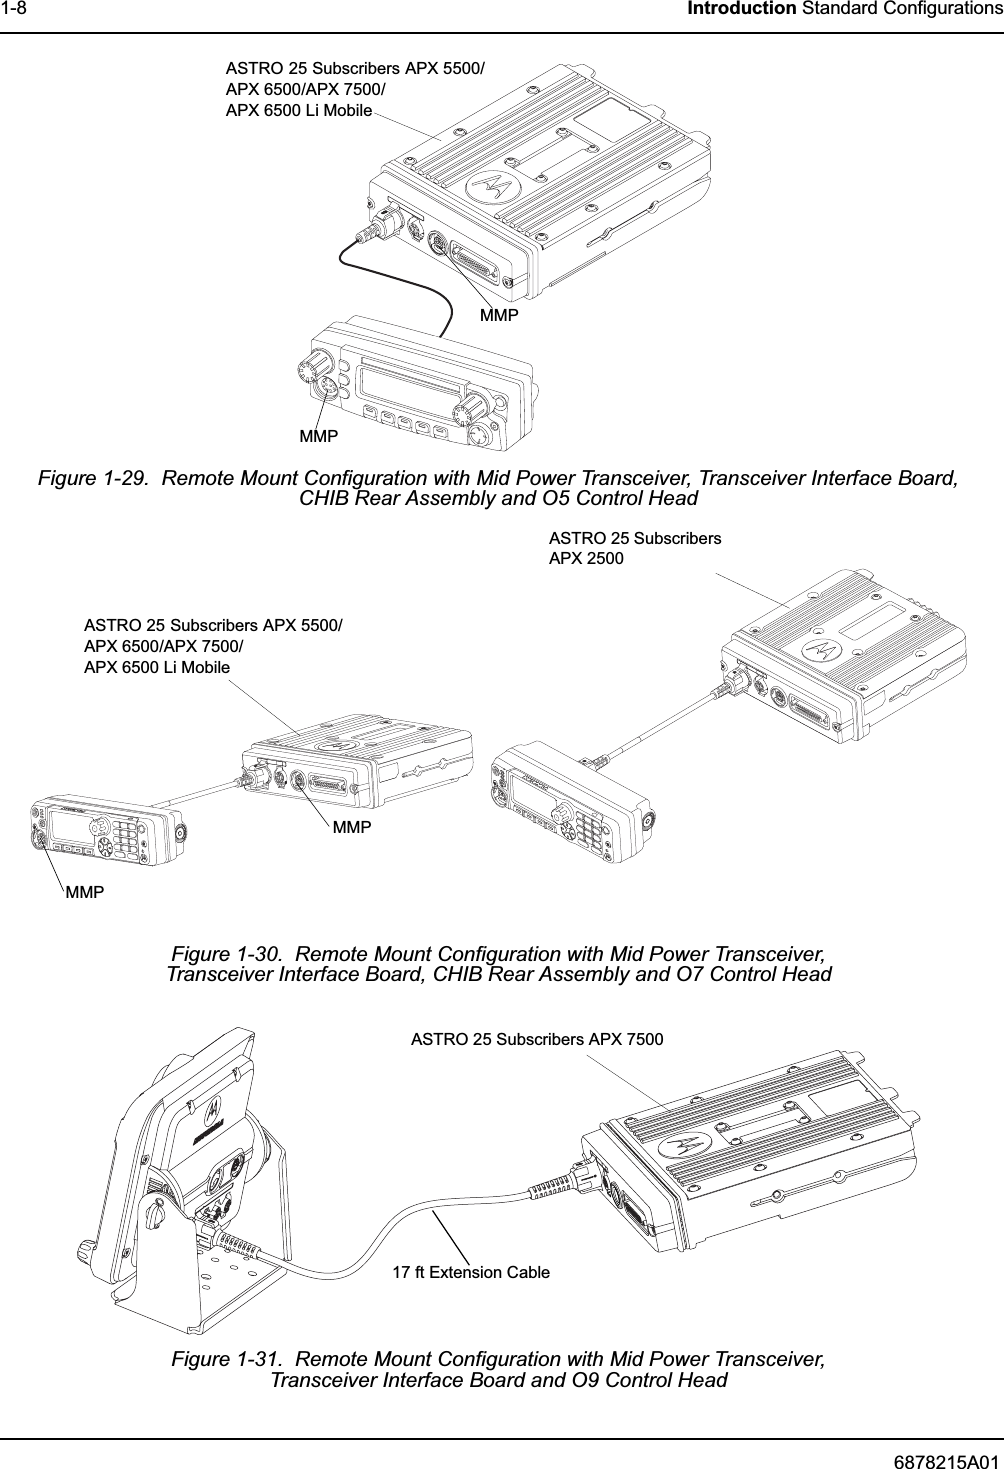 6878215A011-8 Introduction Standard ConfigurationsFigure 1-29.  Remote Mount Configuration with Mid Power Transceiver, Transceiver Interface Board, CHIB Rear Assembly and O5 Control HeadFigure 1-30.  Remote Mount Configuration with Mid Power Transceiver, Transceiver Interface Board, CHIB Rear Assembly and O7 Control HeadFigure 1-31.  Remote Mount Configuration with Mid Power Transceiver, Transceiver Interface Board and O9 Control HeadMMPMMPASTRO 25 Subscribers APX 5500/APX 6500/APX 7500/APX 6500 Li MobileMMPMMPASTRO 25 Subscribers APX 5500/APX 6500/APX 7500/APX 6500 Li MobileASTRO 25 Subscribers APX 250017 ft Extension CableASTRO 25 Subscribers APX 7500